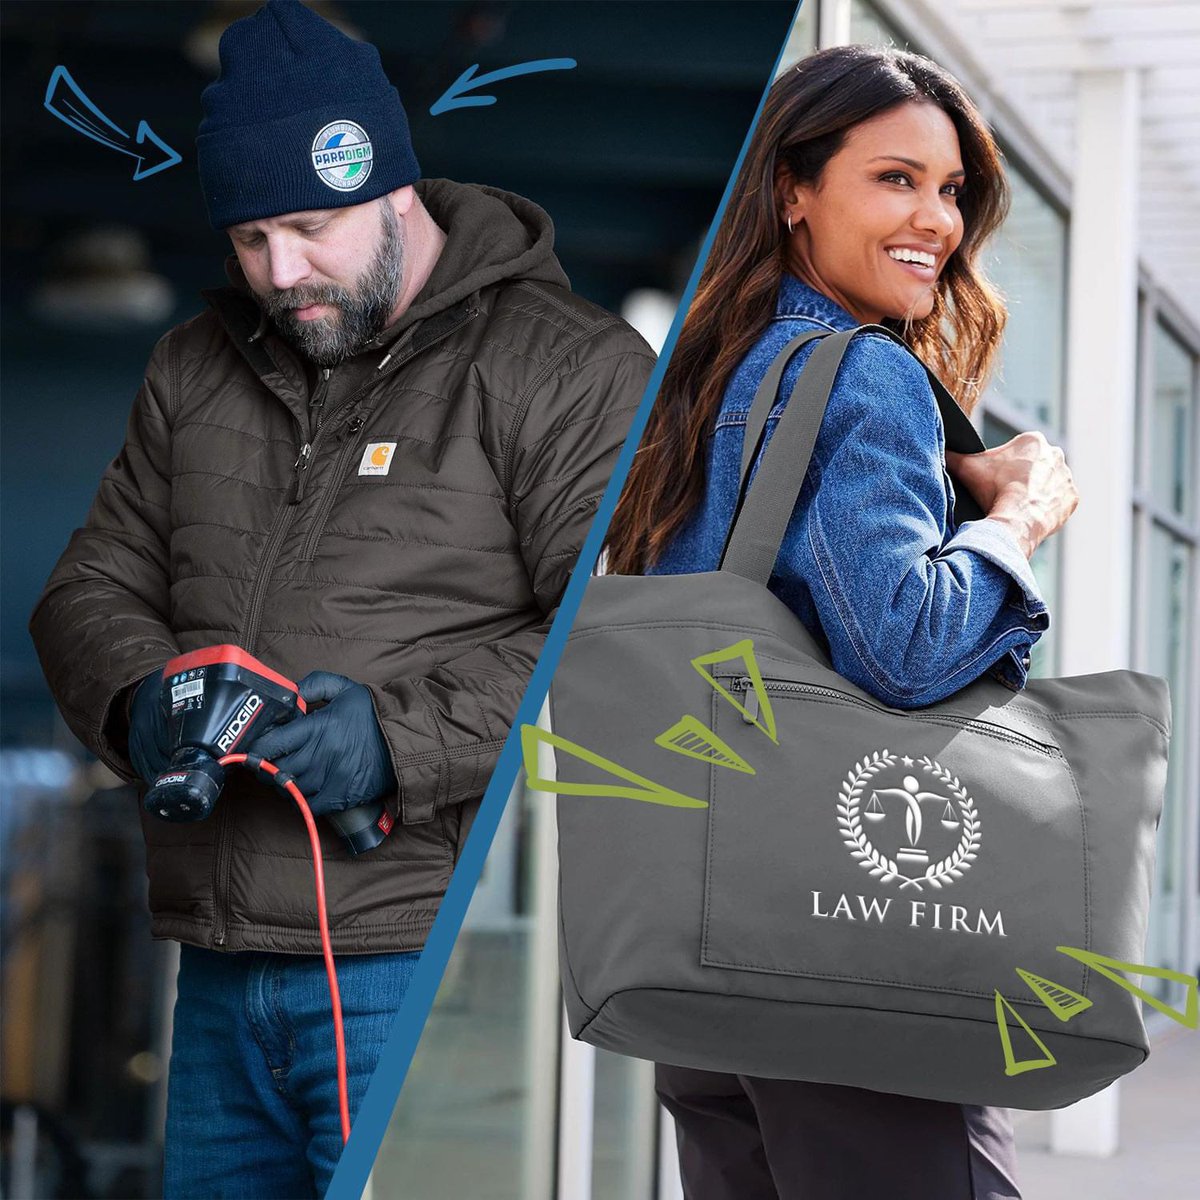 Level up your brand's presence with custom hats, bags and totes tailored to your business. Put your logo front and center, making every outing an opportunity to showcase your brand's style and professionalism. Contact us 281 2963742 . #CustomHats #CustomBags #BrandEssentials